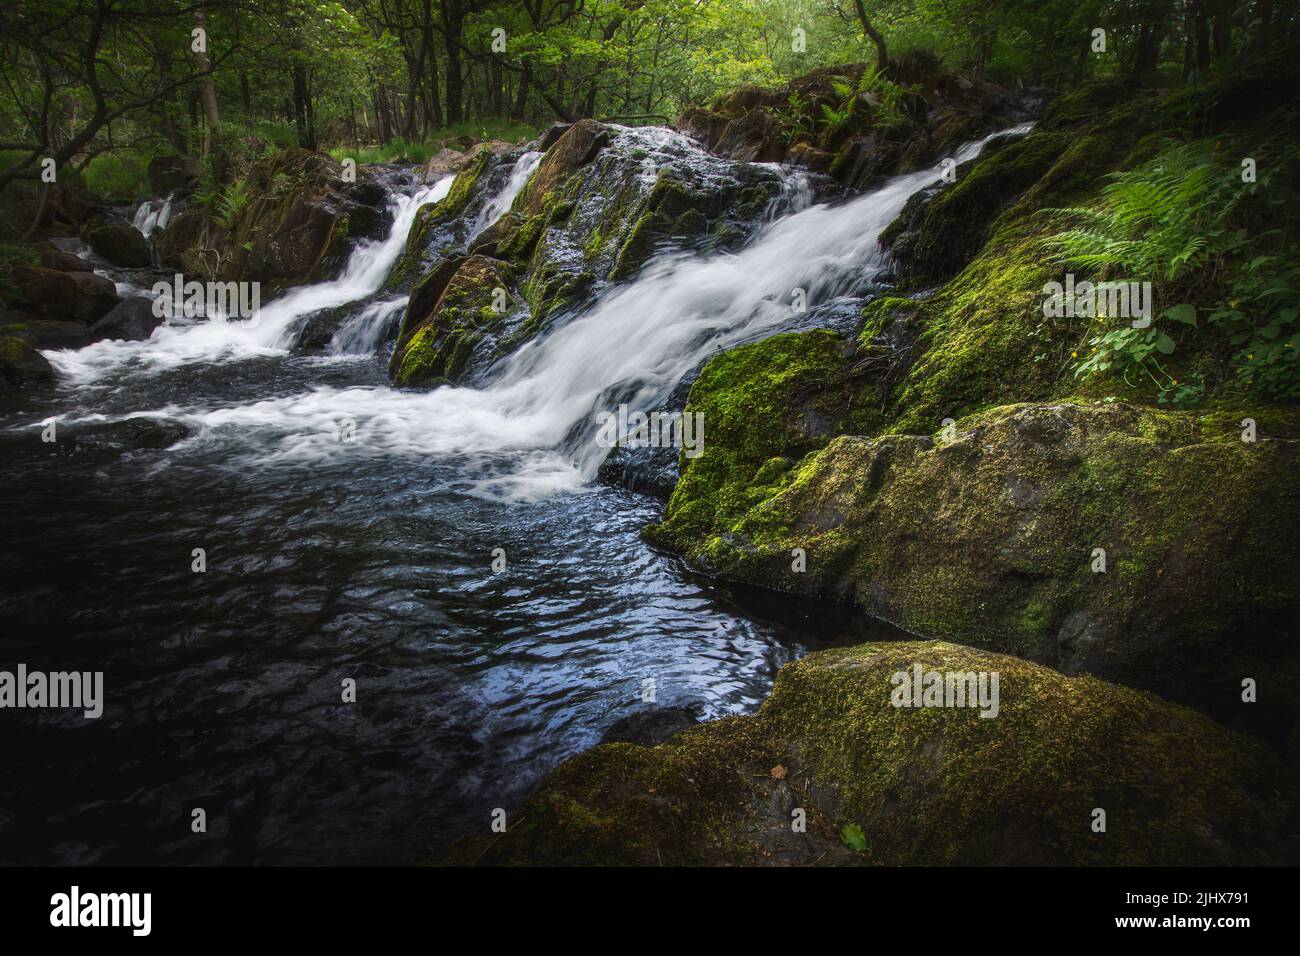 Waterfall in Lake District woodland. Beautiful and tranquill landscape scene. Pristine natural environment. Stock Photo